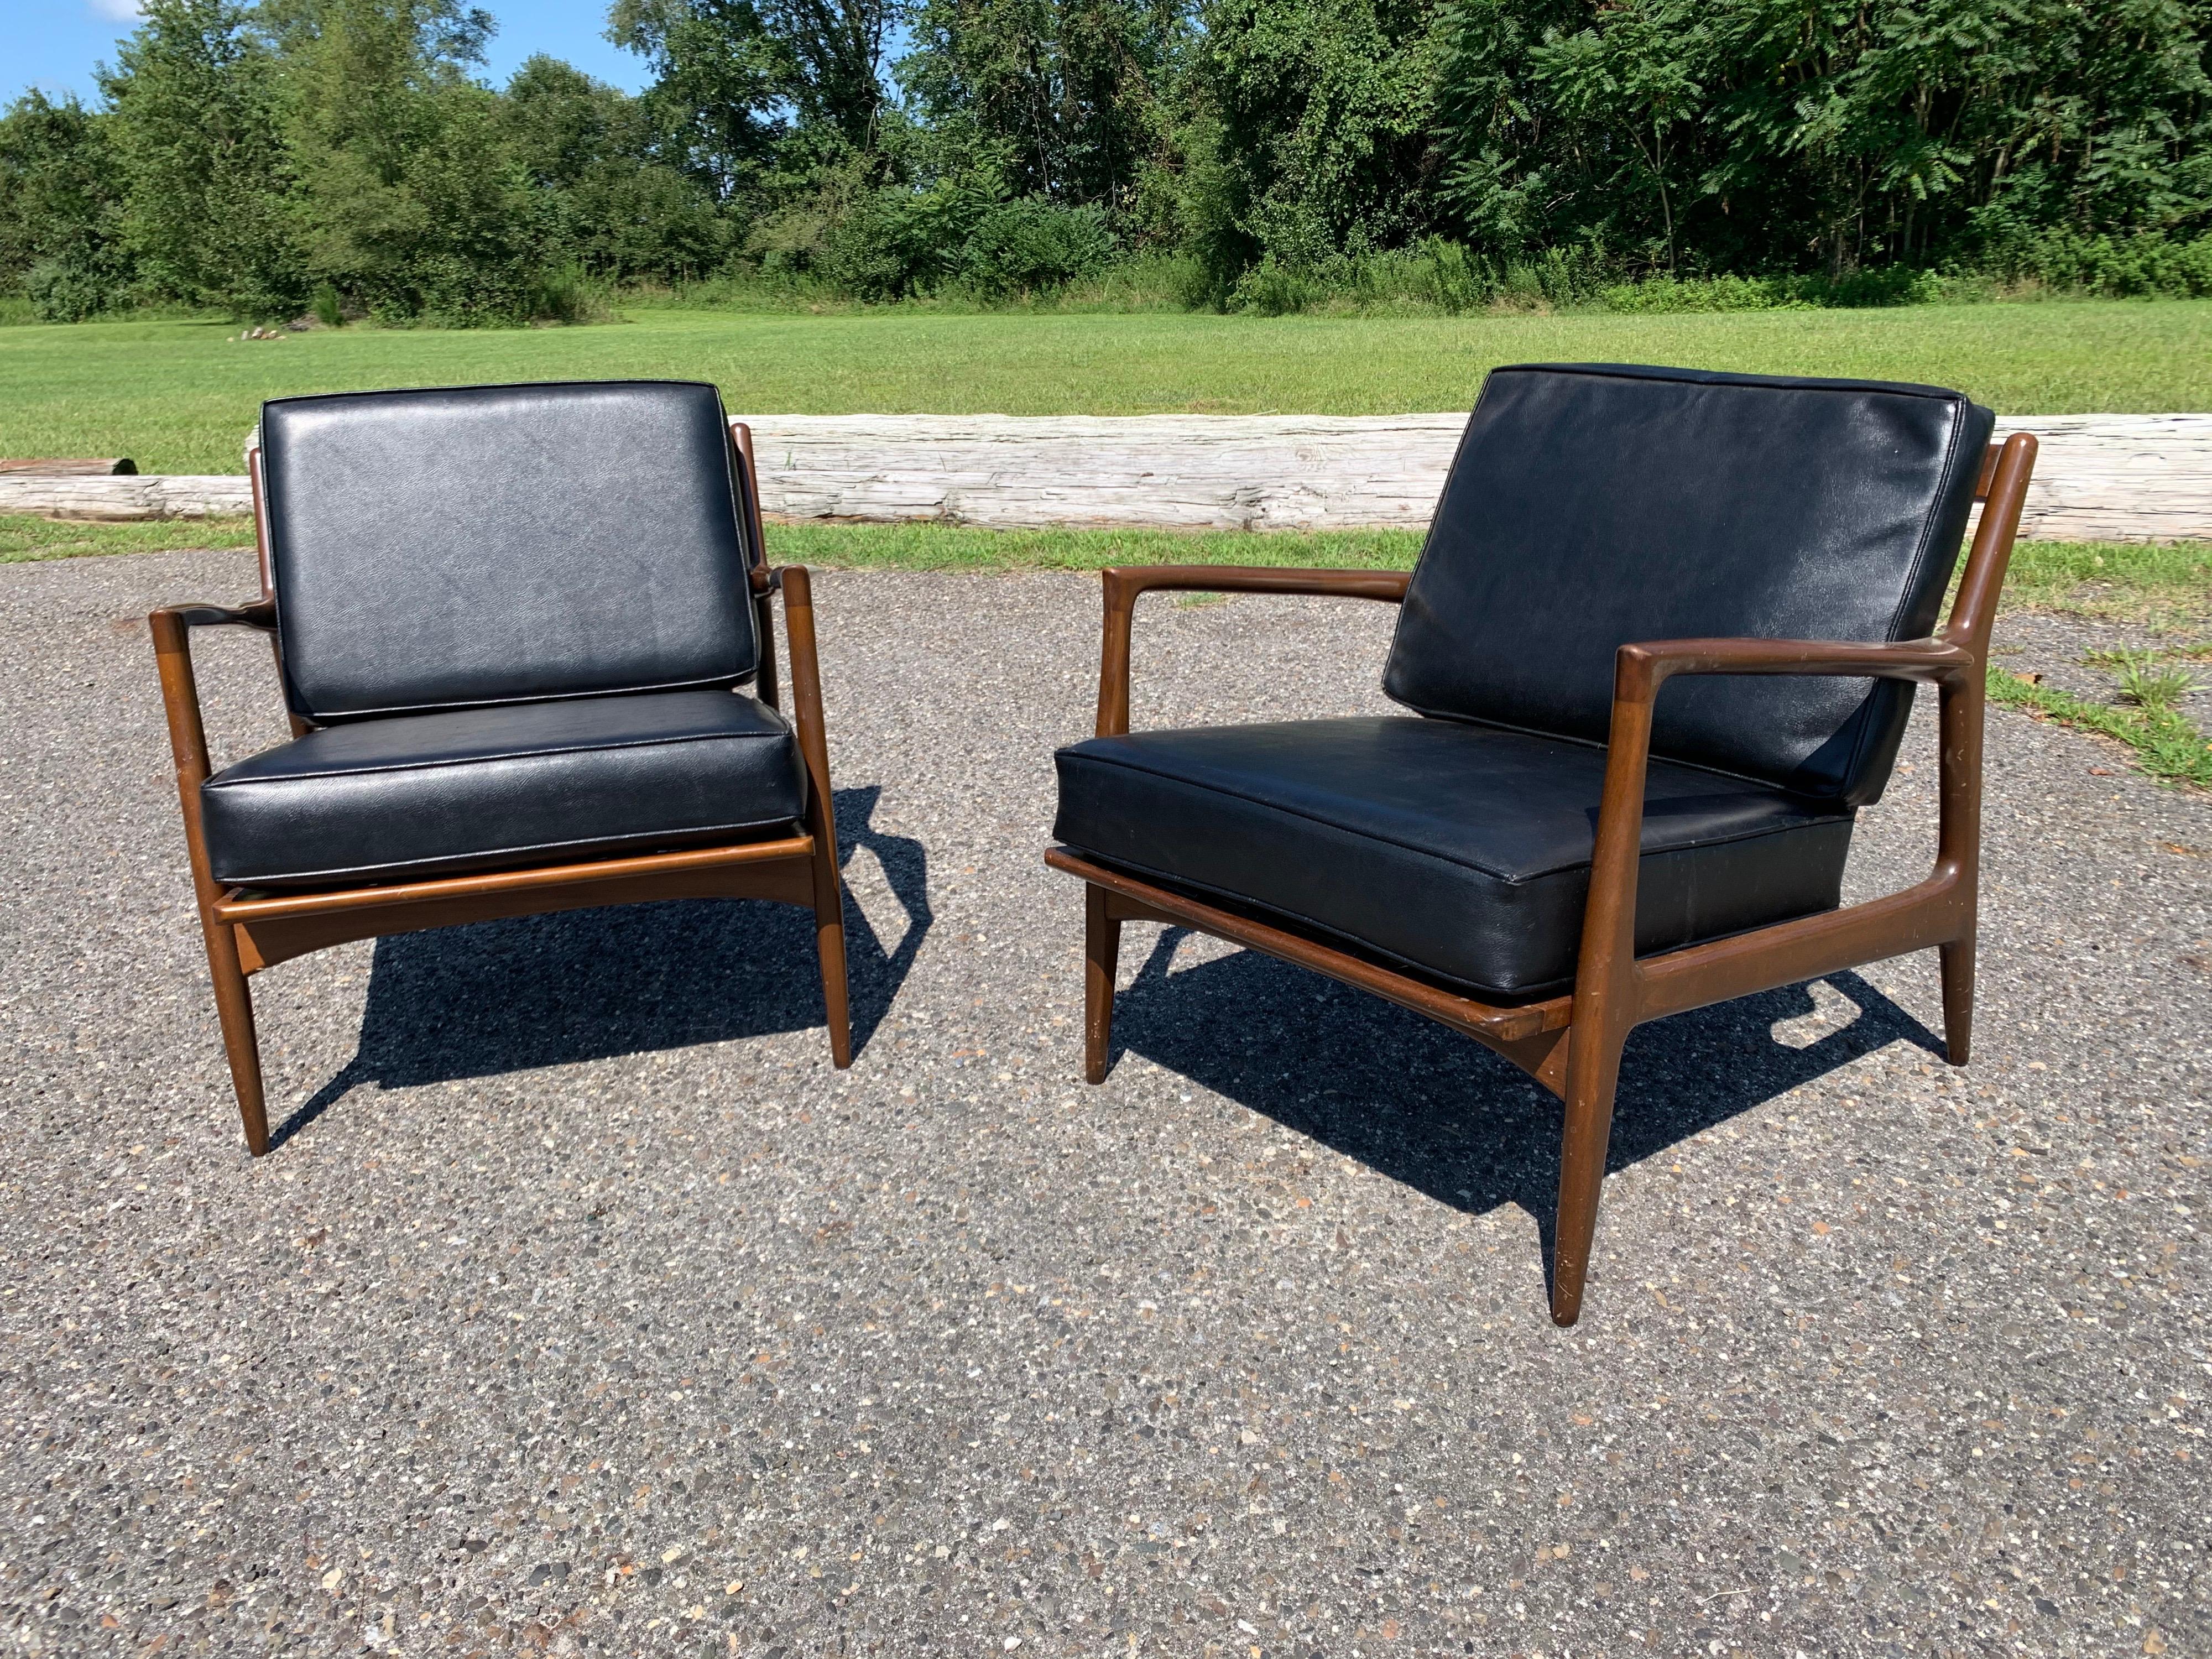 IB Kofod Larsen Lounge Chairs with new straps. Shipped with Blanket wrap courier service.
Bench frames having vinyl cushions and new straps. Solid condition with minor signs of age and usage. Well maintained.
27x30.5x31.5” HWD SH 16”